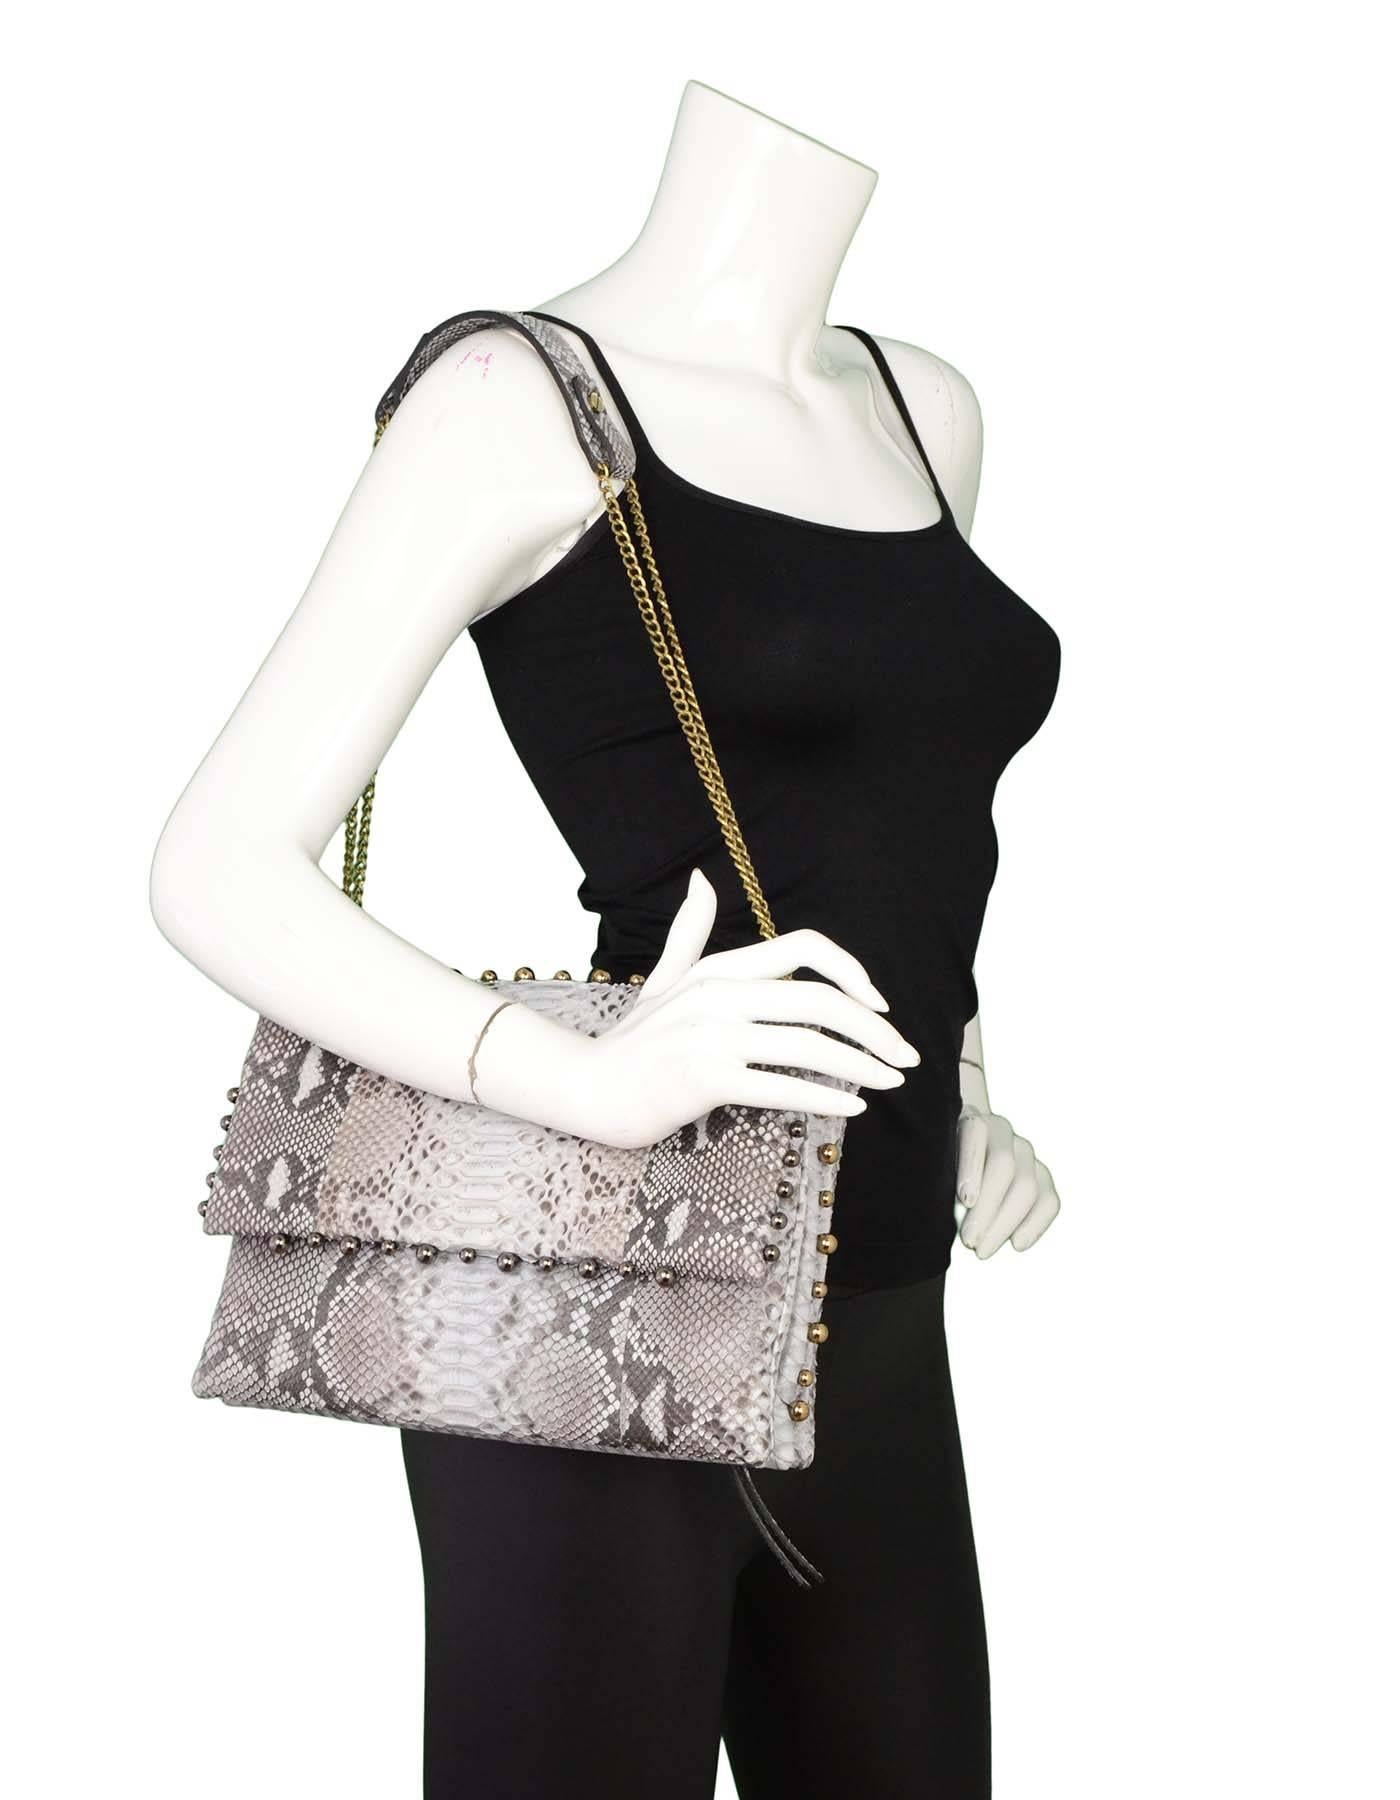 Lanvin Grey Python Studded Sugar Flap Bag

Features ruthenium and goldtone ball studs throughout

Made in: Italy
Color: Grey
Hardware: Ruthenium and goldtone
Materials: Python
Lining: Black textile
Closure/opening: Flap top closure with